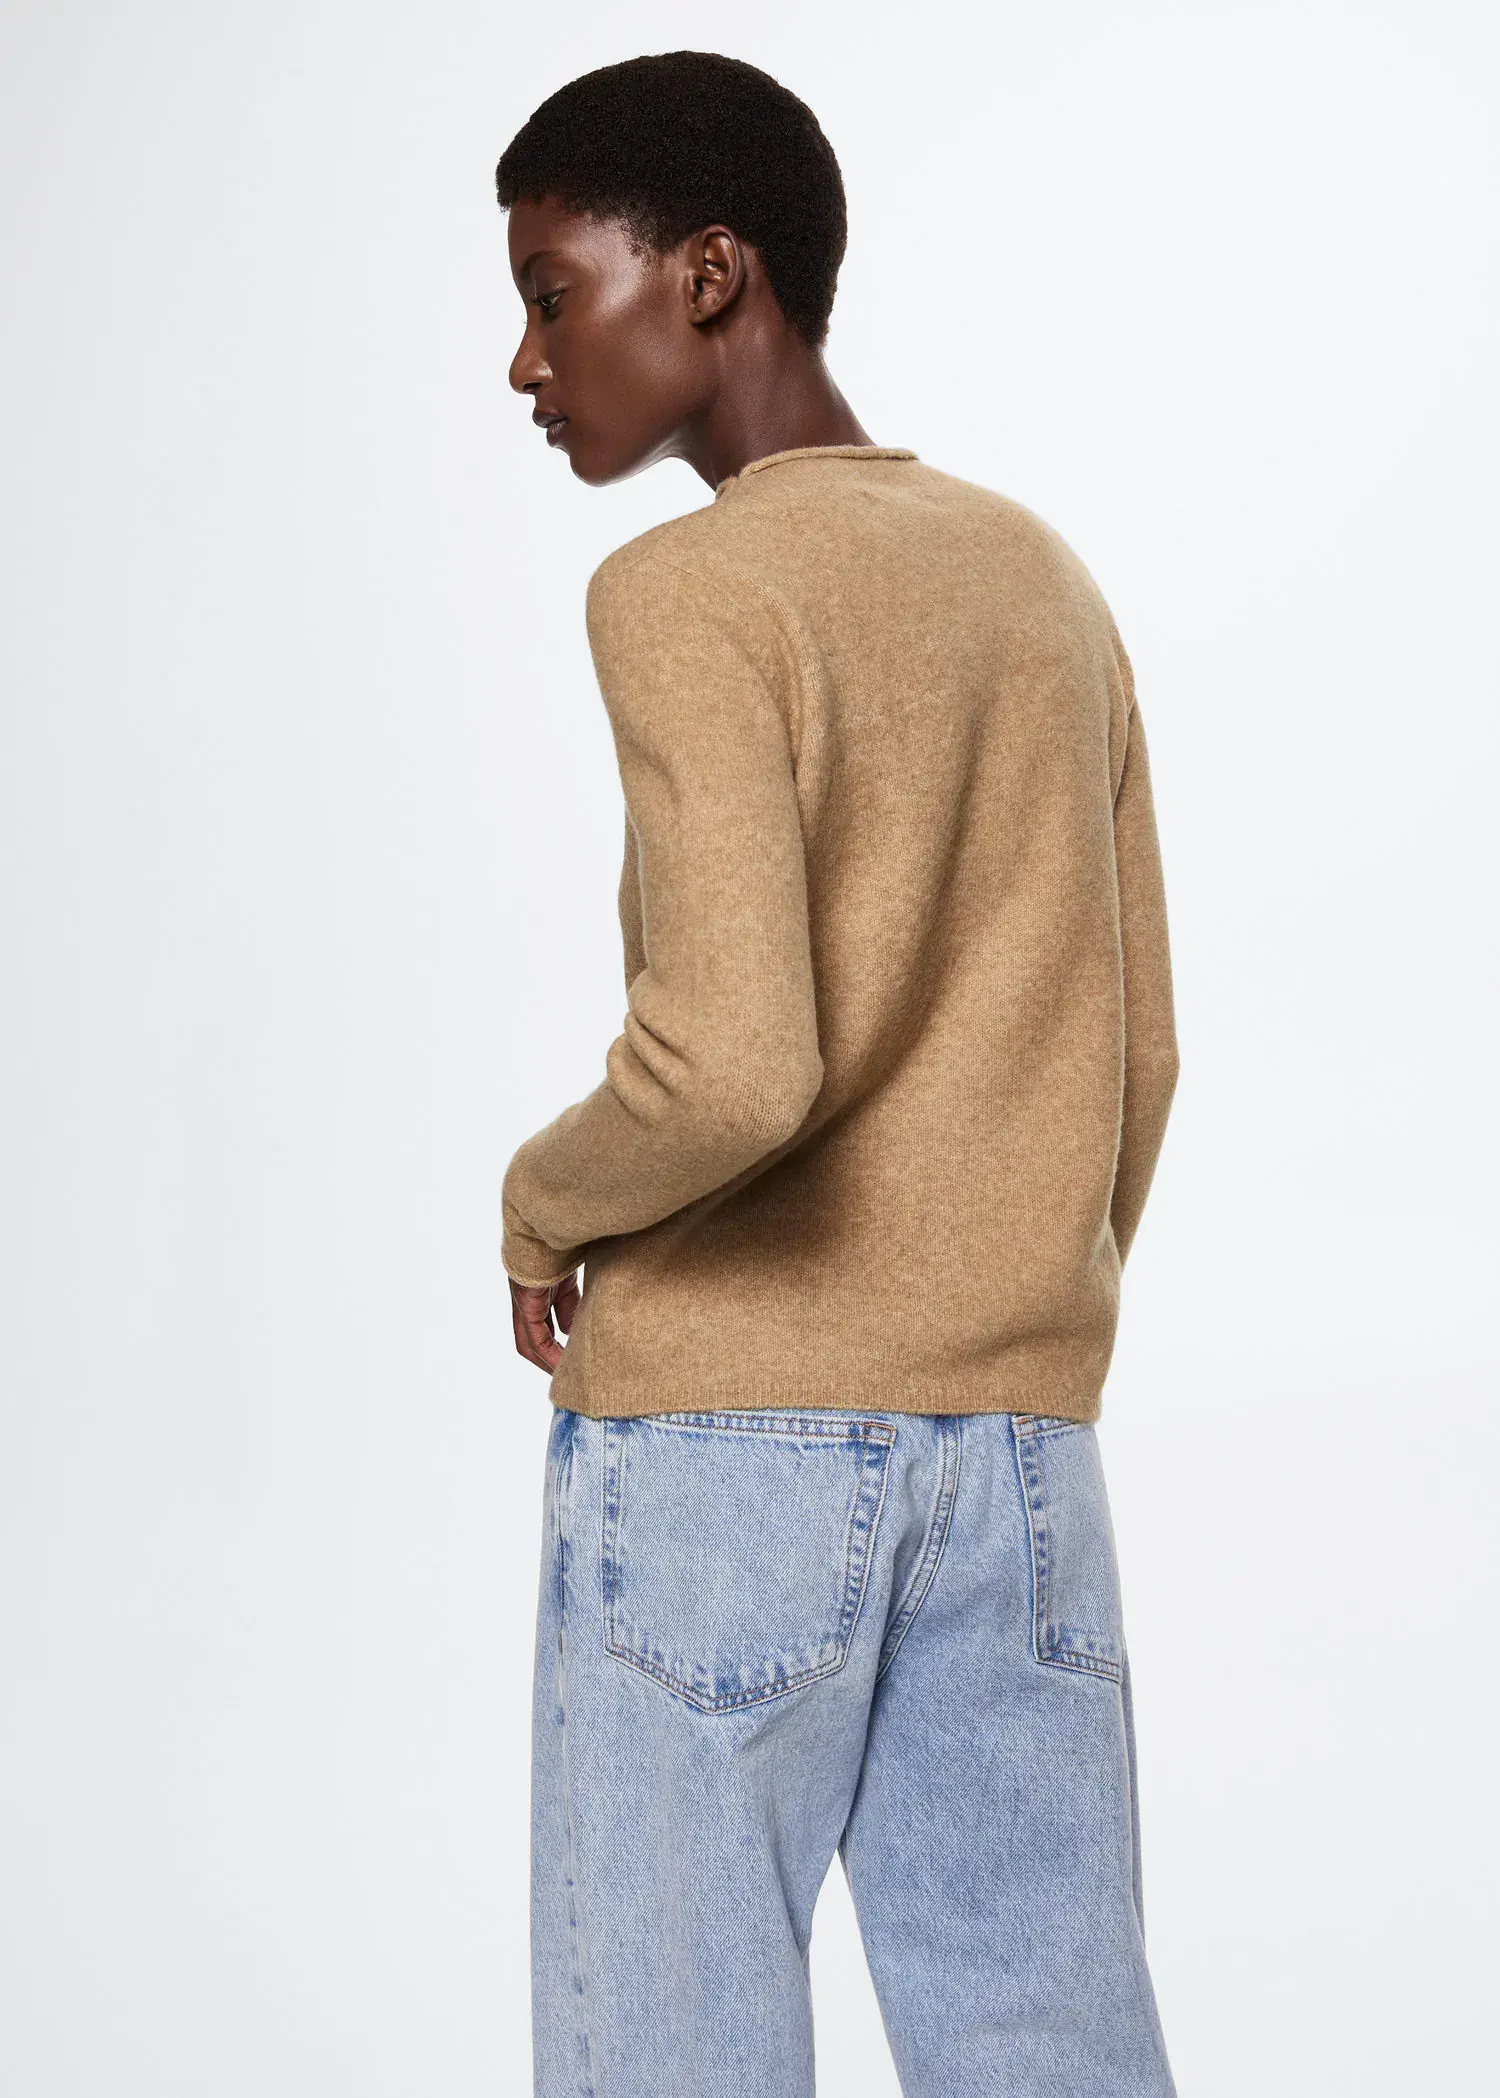 Mango High collar sweater. a man in a tan sweater and blue jeans. 